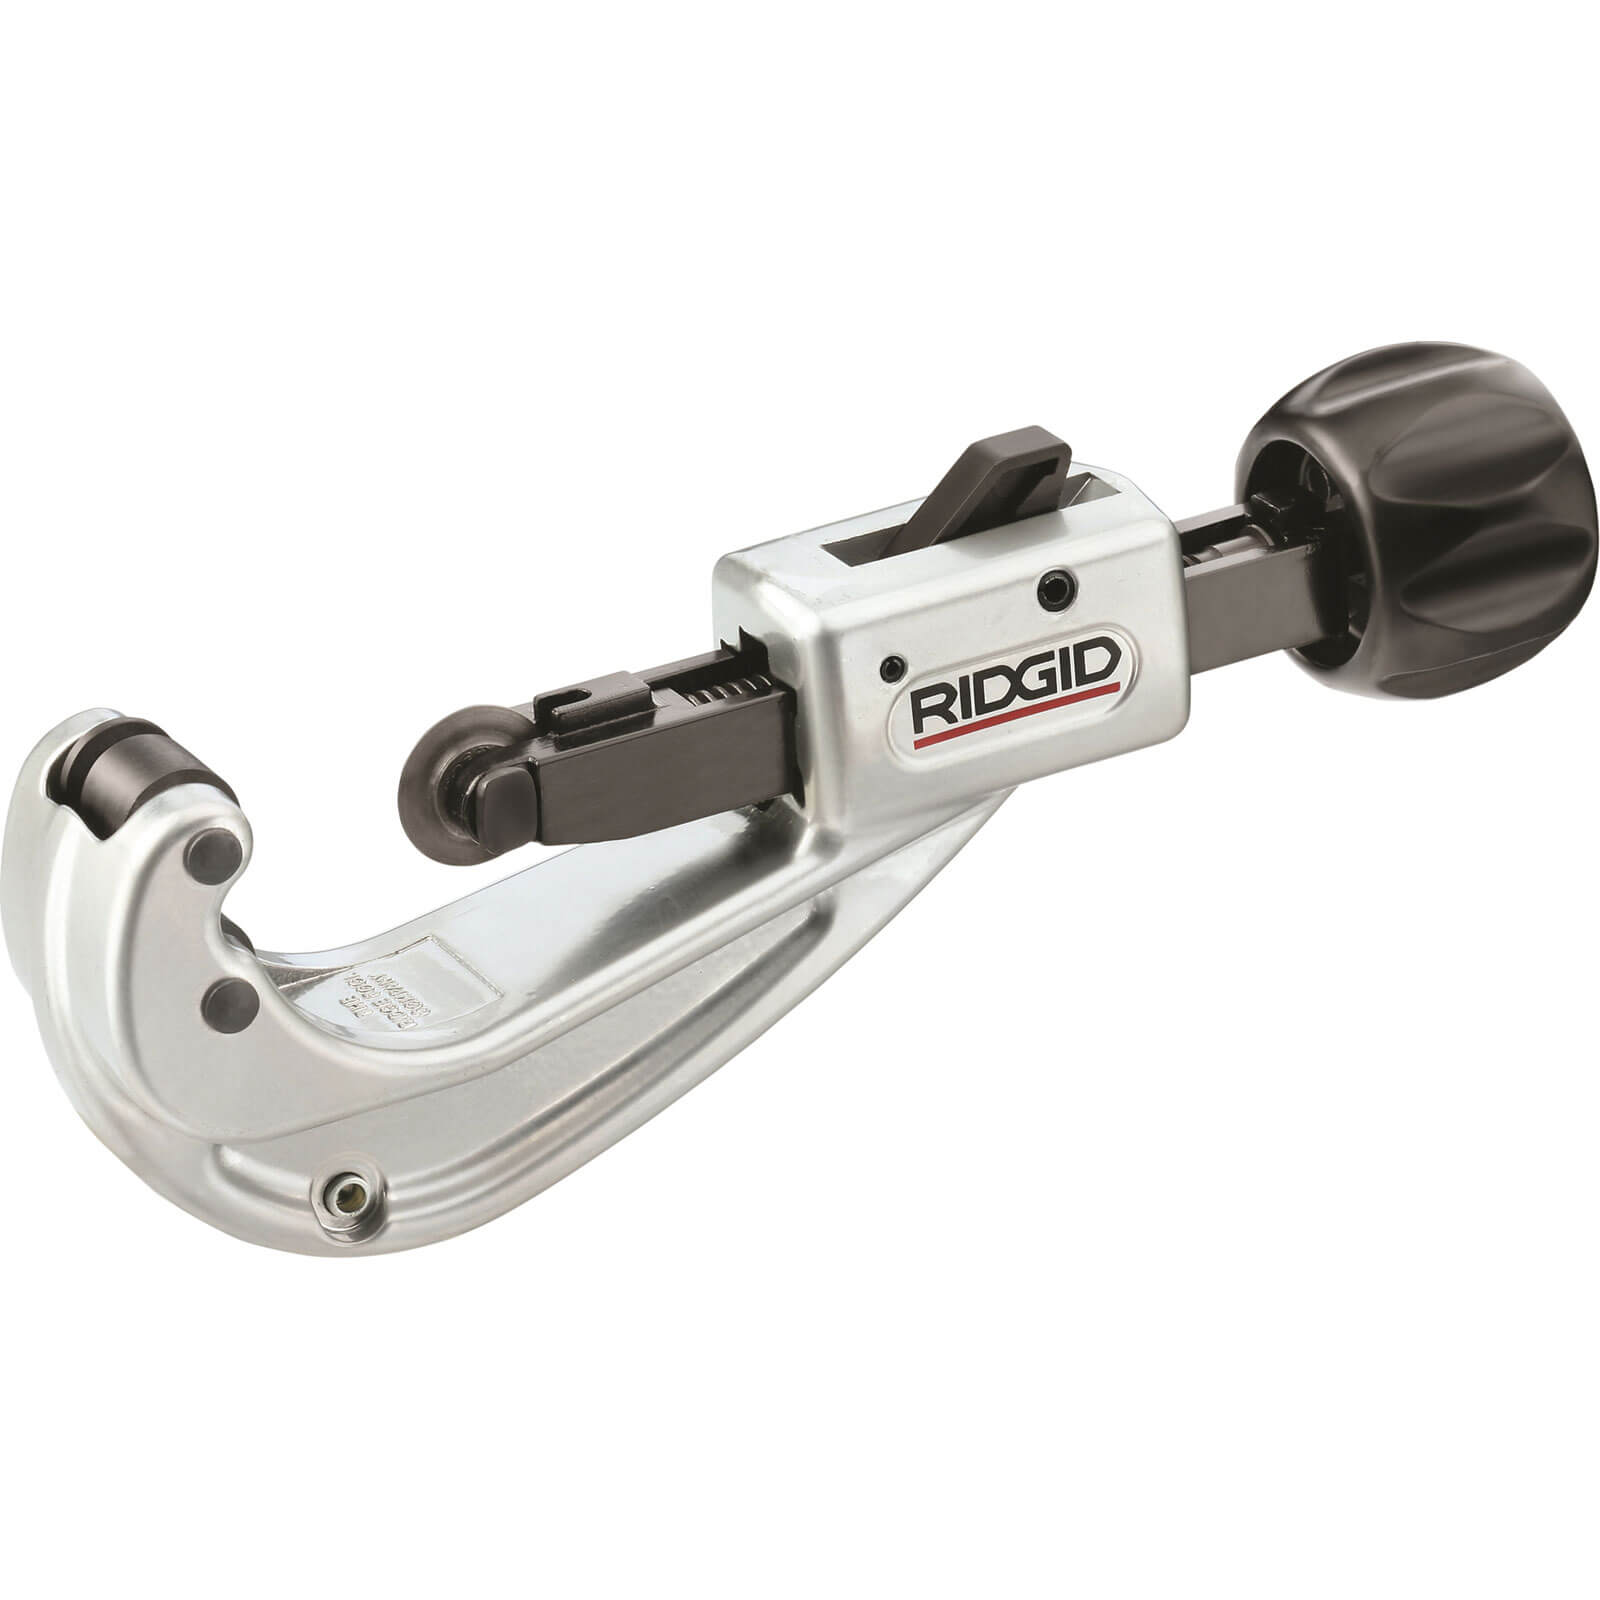 Image of Ridgid Quick Acting Copper Pipe Cutter 6mm - 42mm